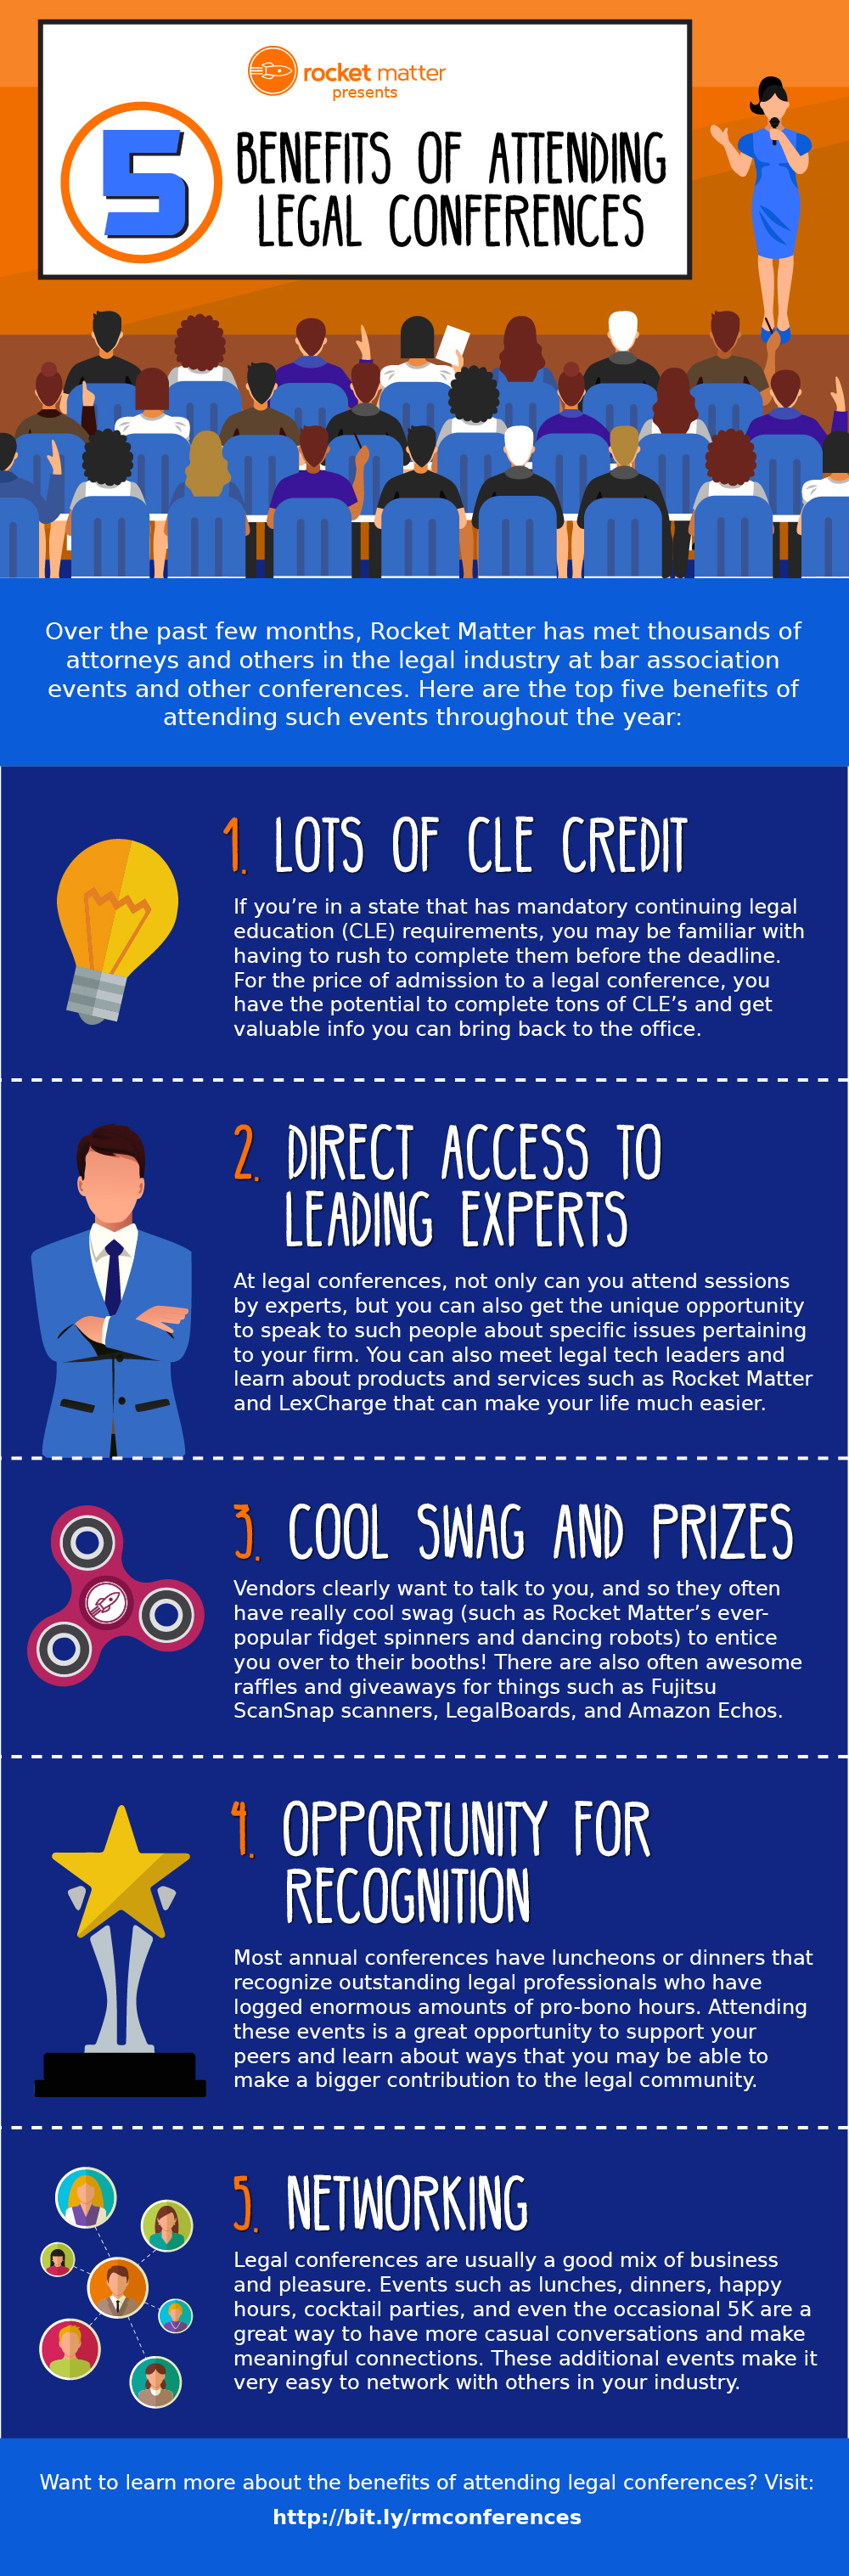 5 benefits of attending legal conferences (infographic)